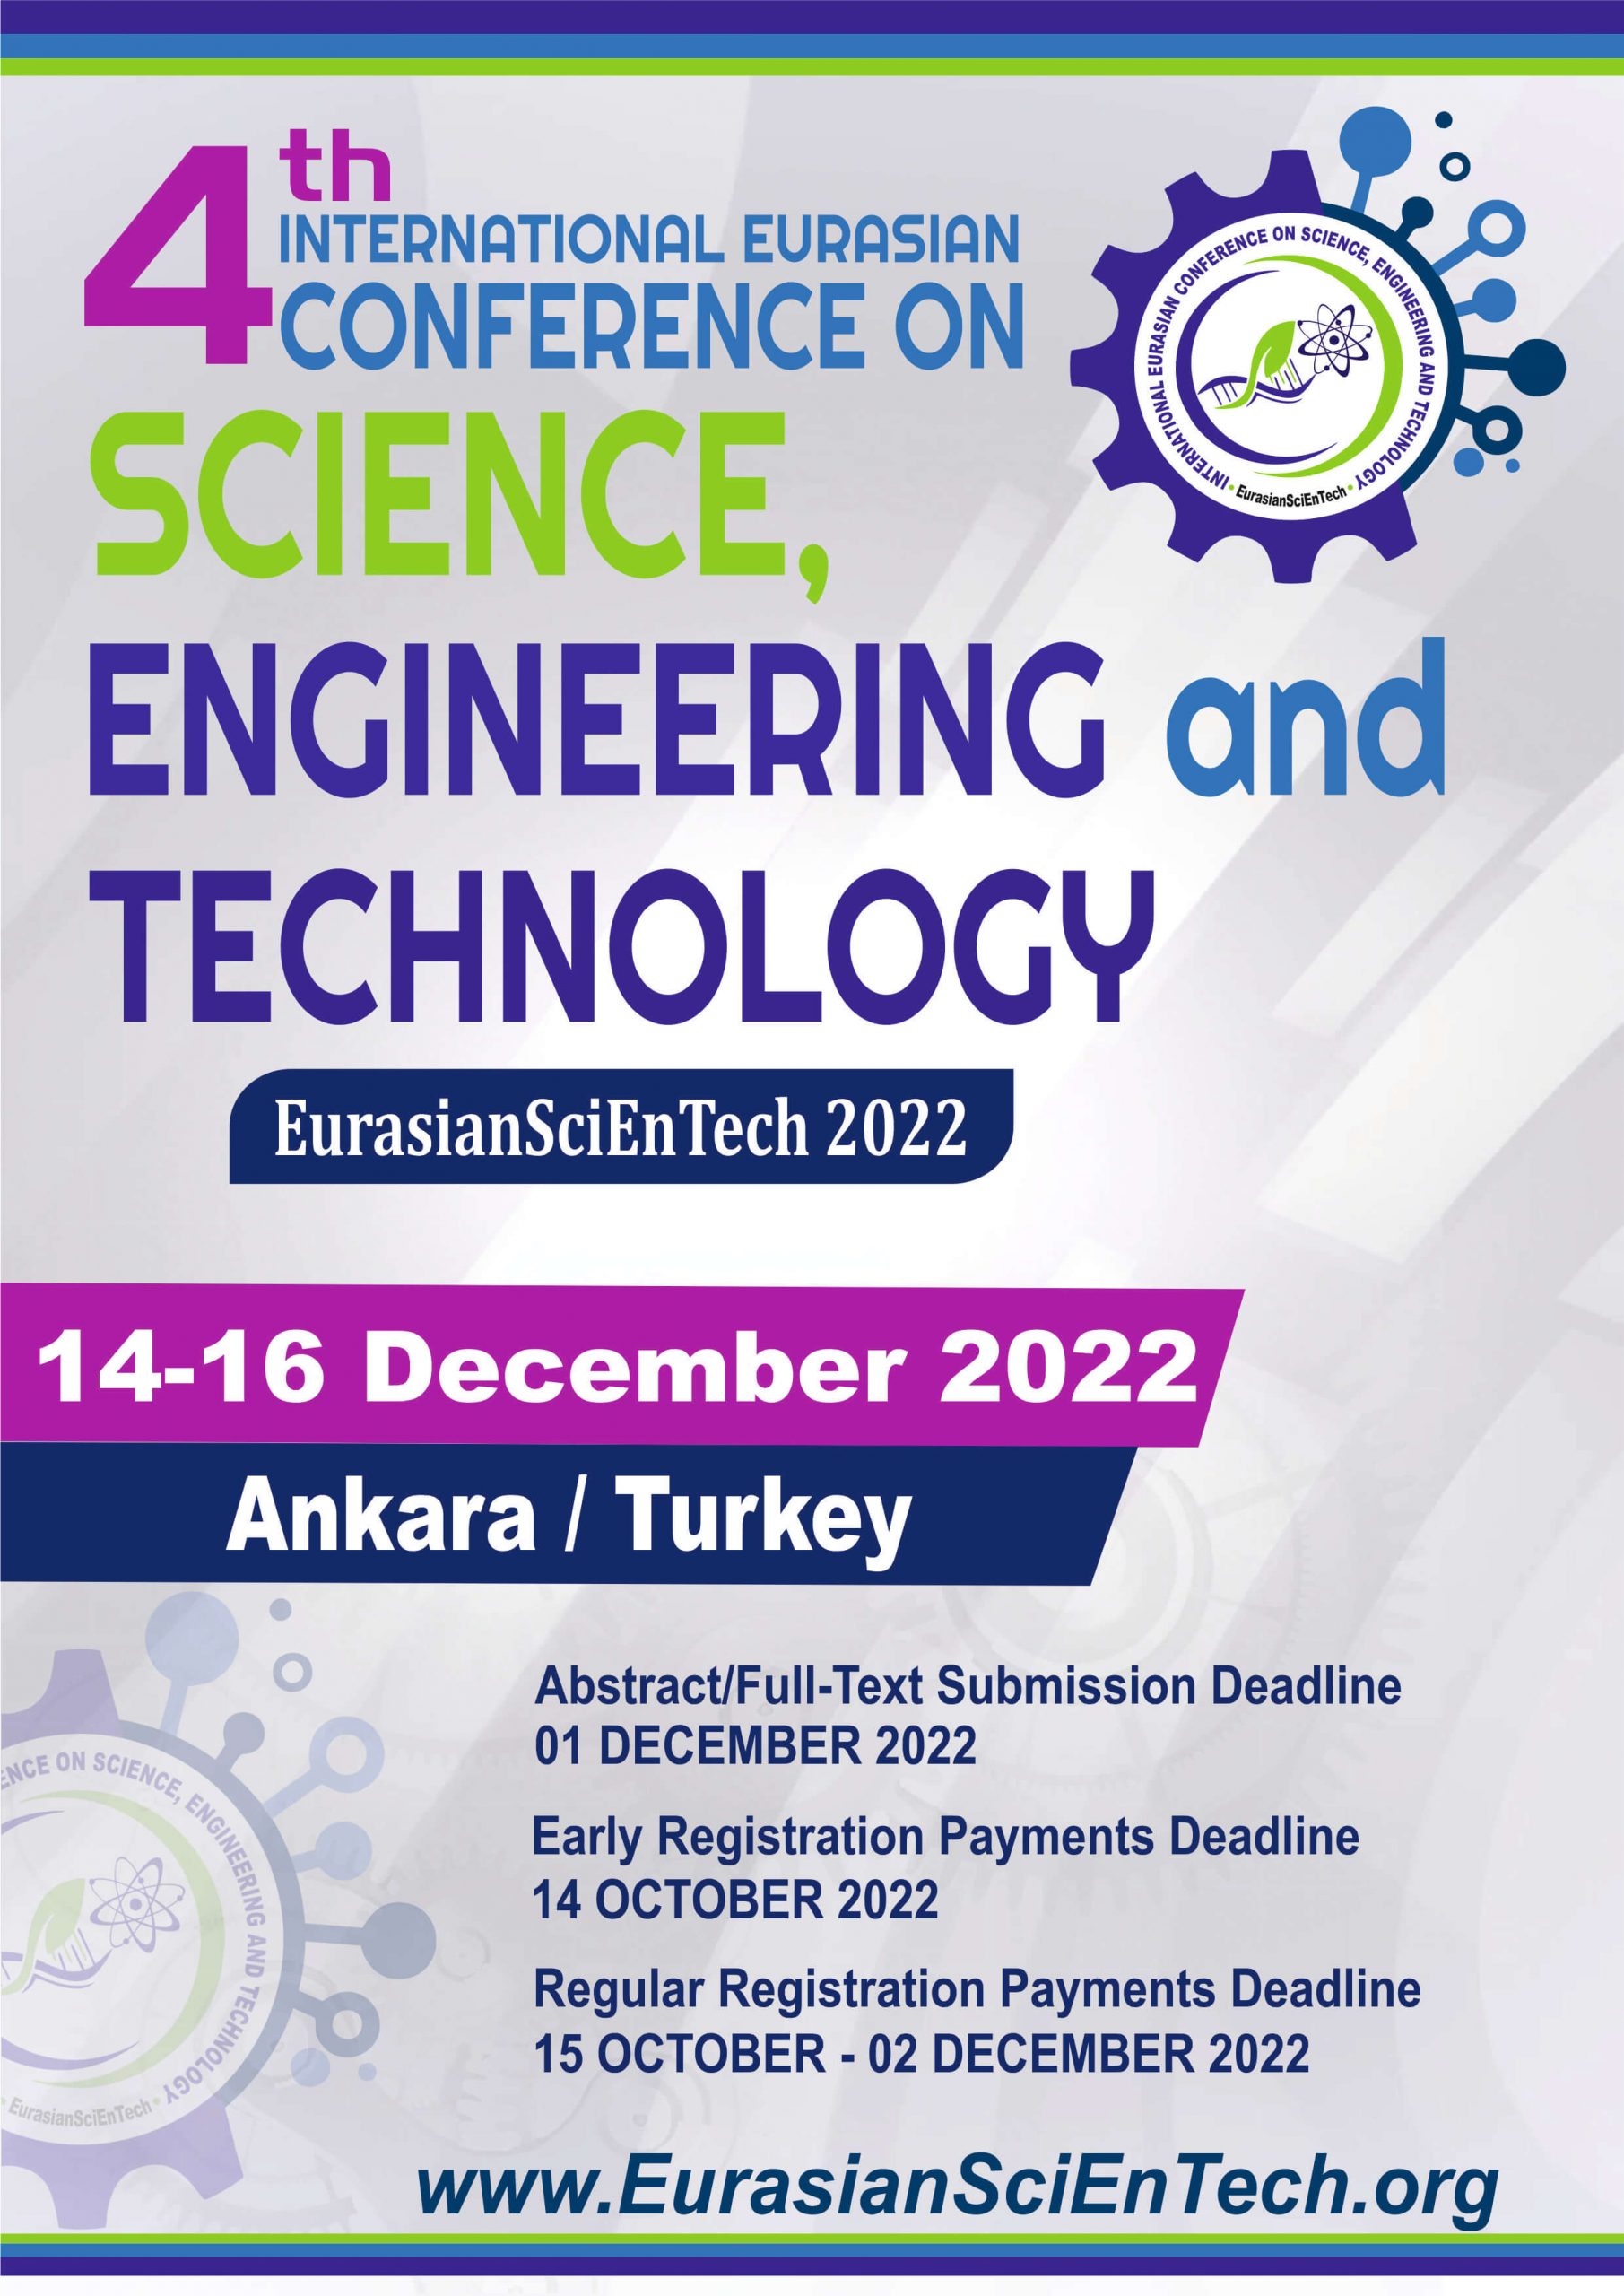 4th International Eurasian Conference on Science, Engineering and Technology (EurasianSciEnTech 2022)